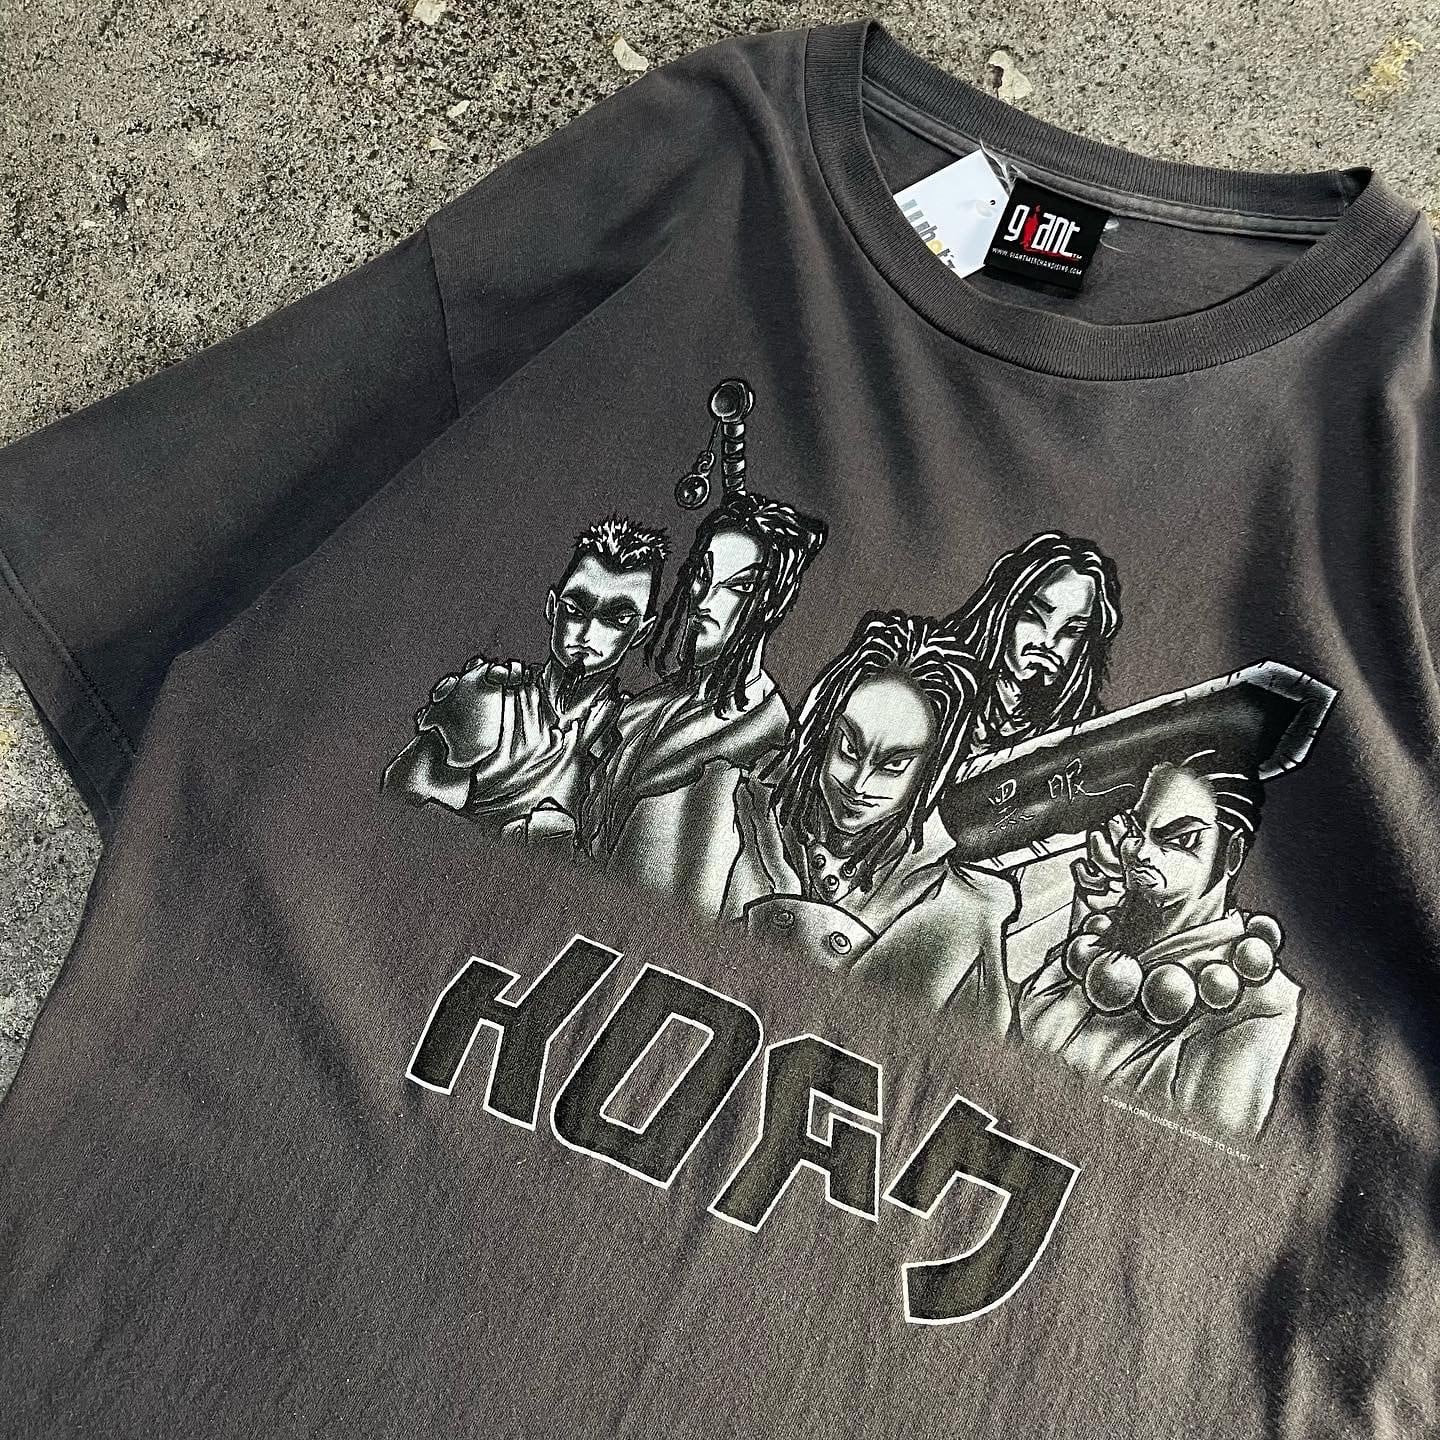 90s KORN T-shirt【仙台店】 | What’z up powered by BASE